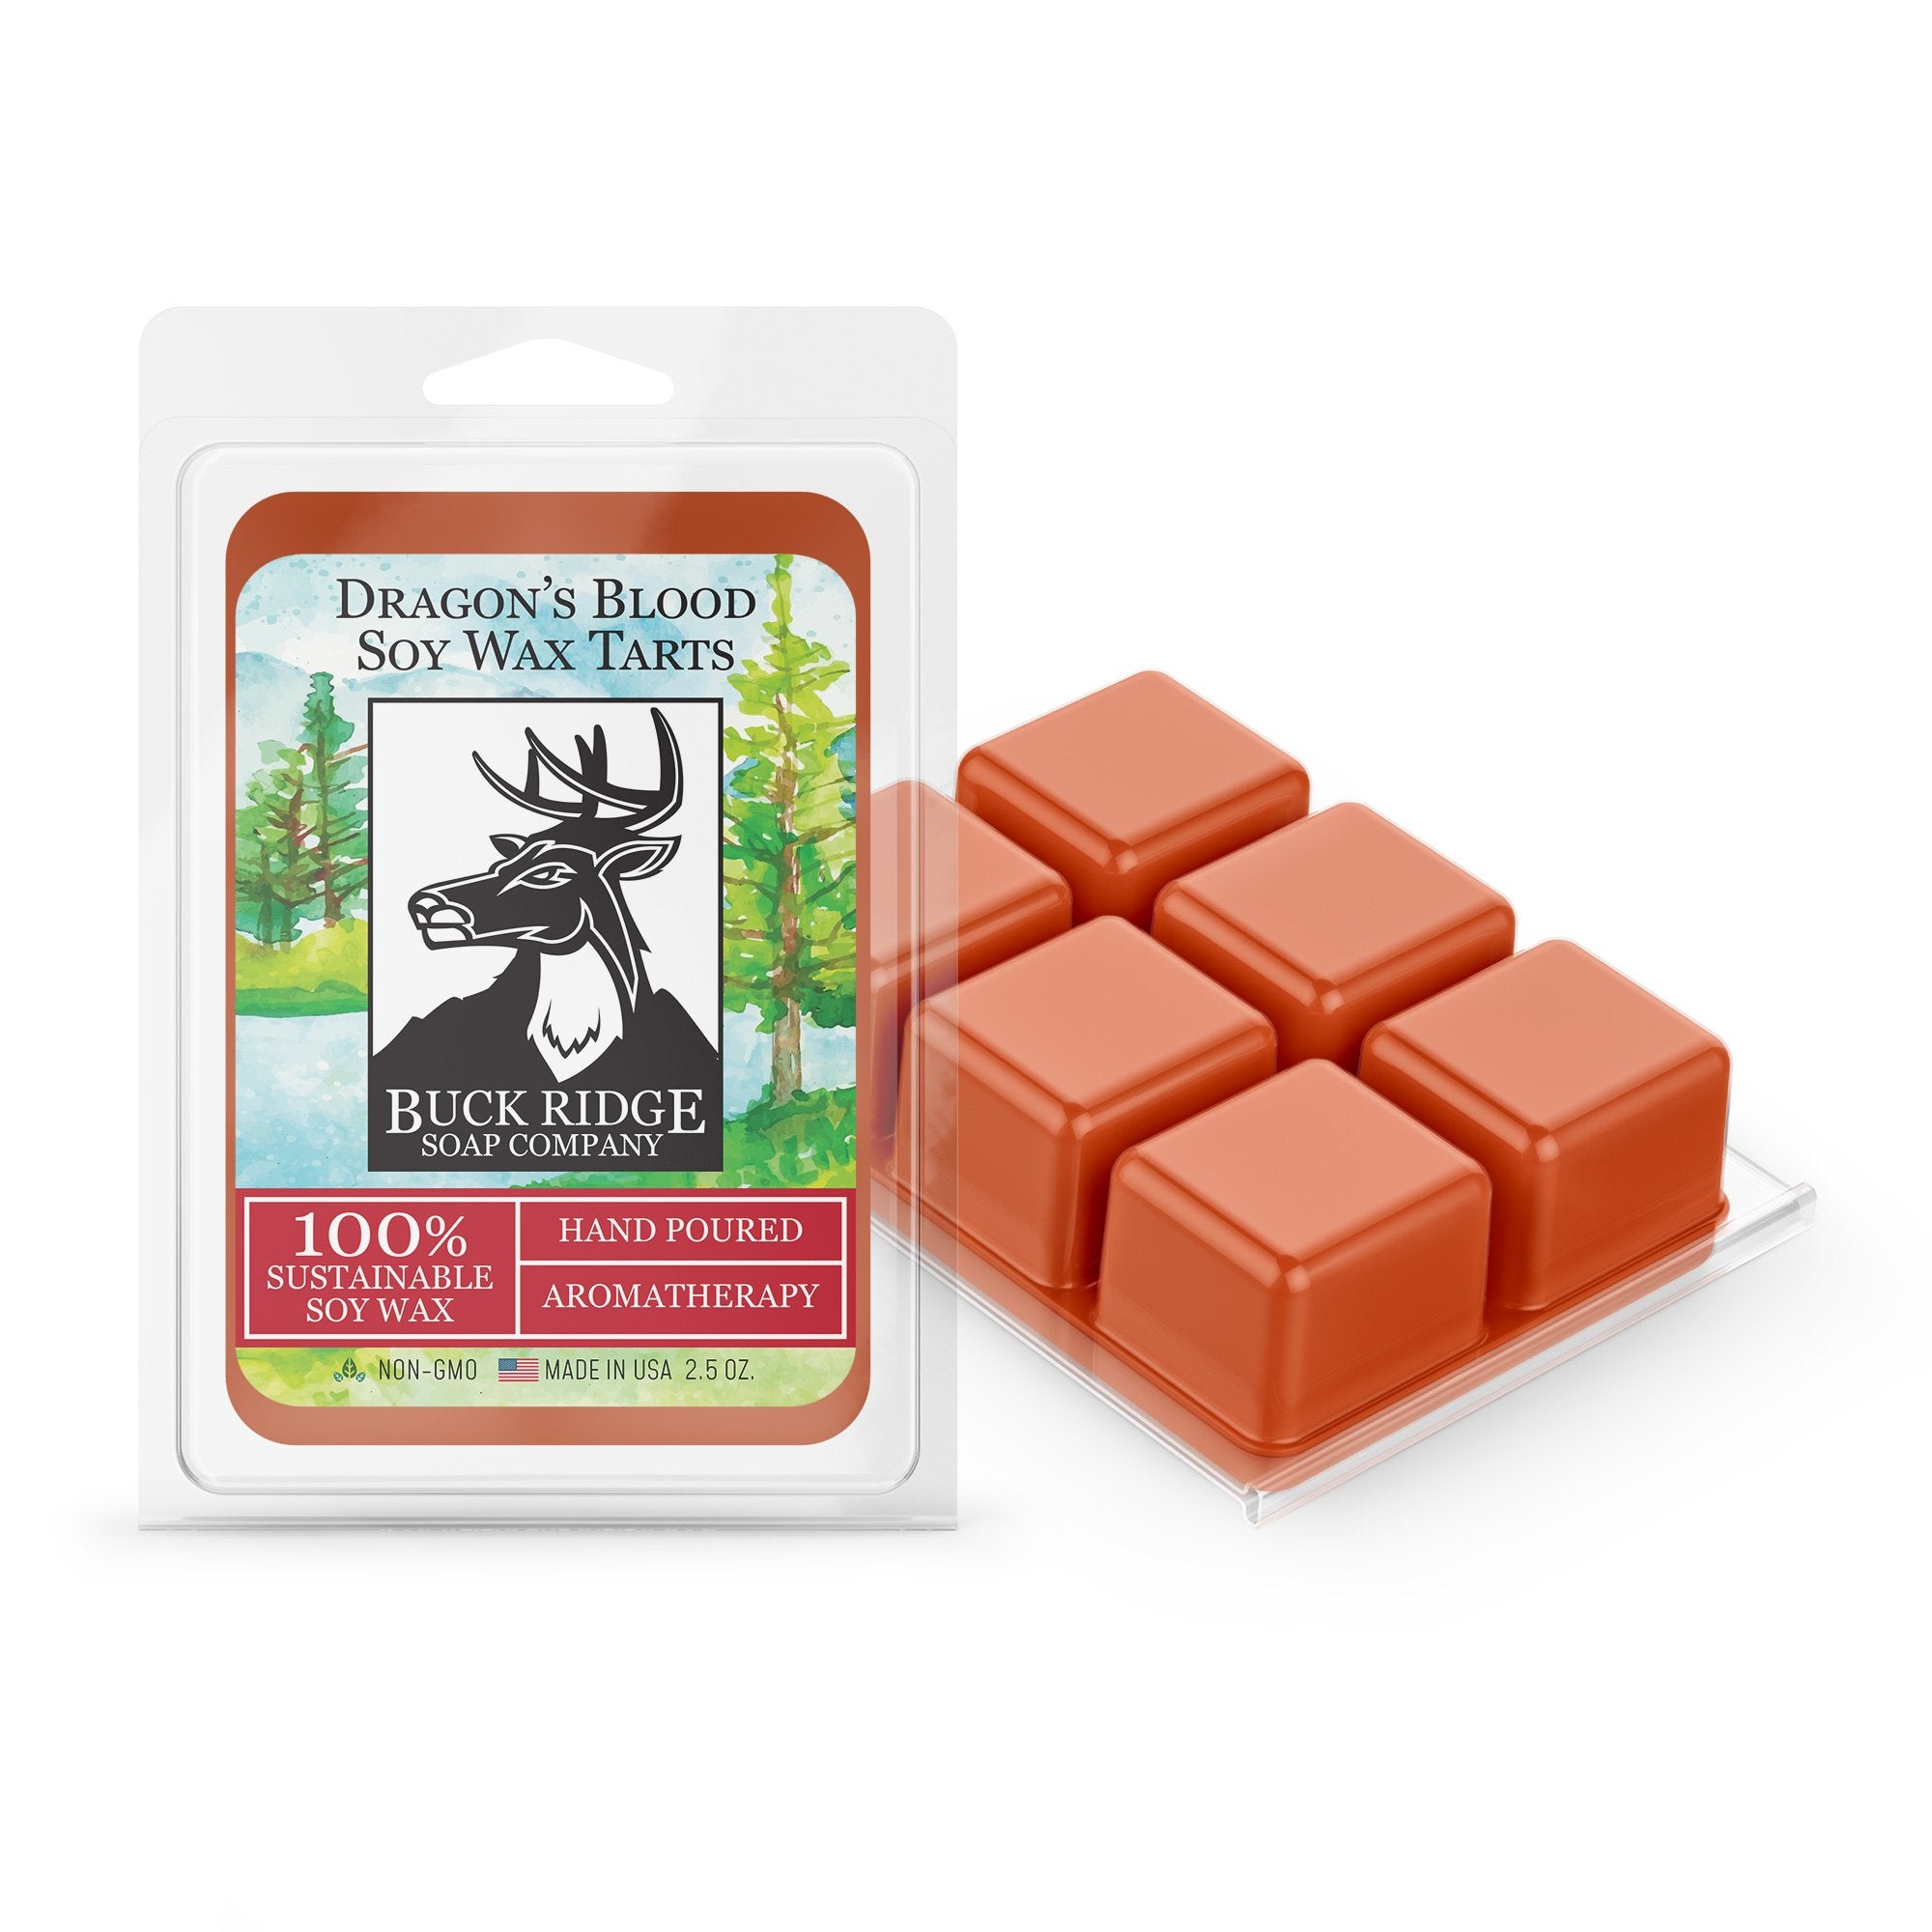 Dragon's Blood Scented Wax Melts by Buck Ridge Soap Company